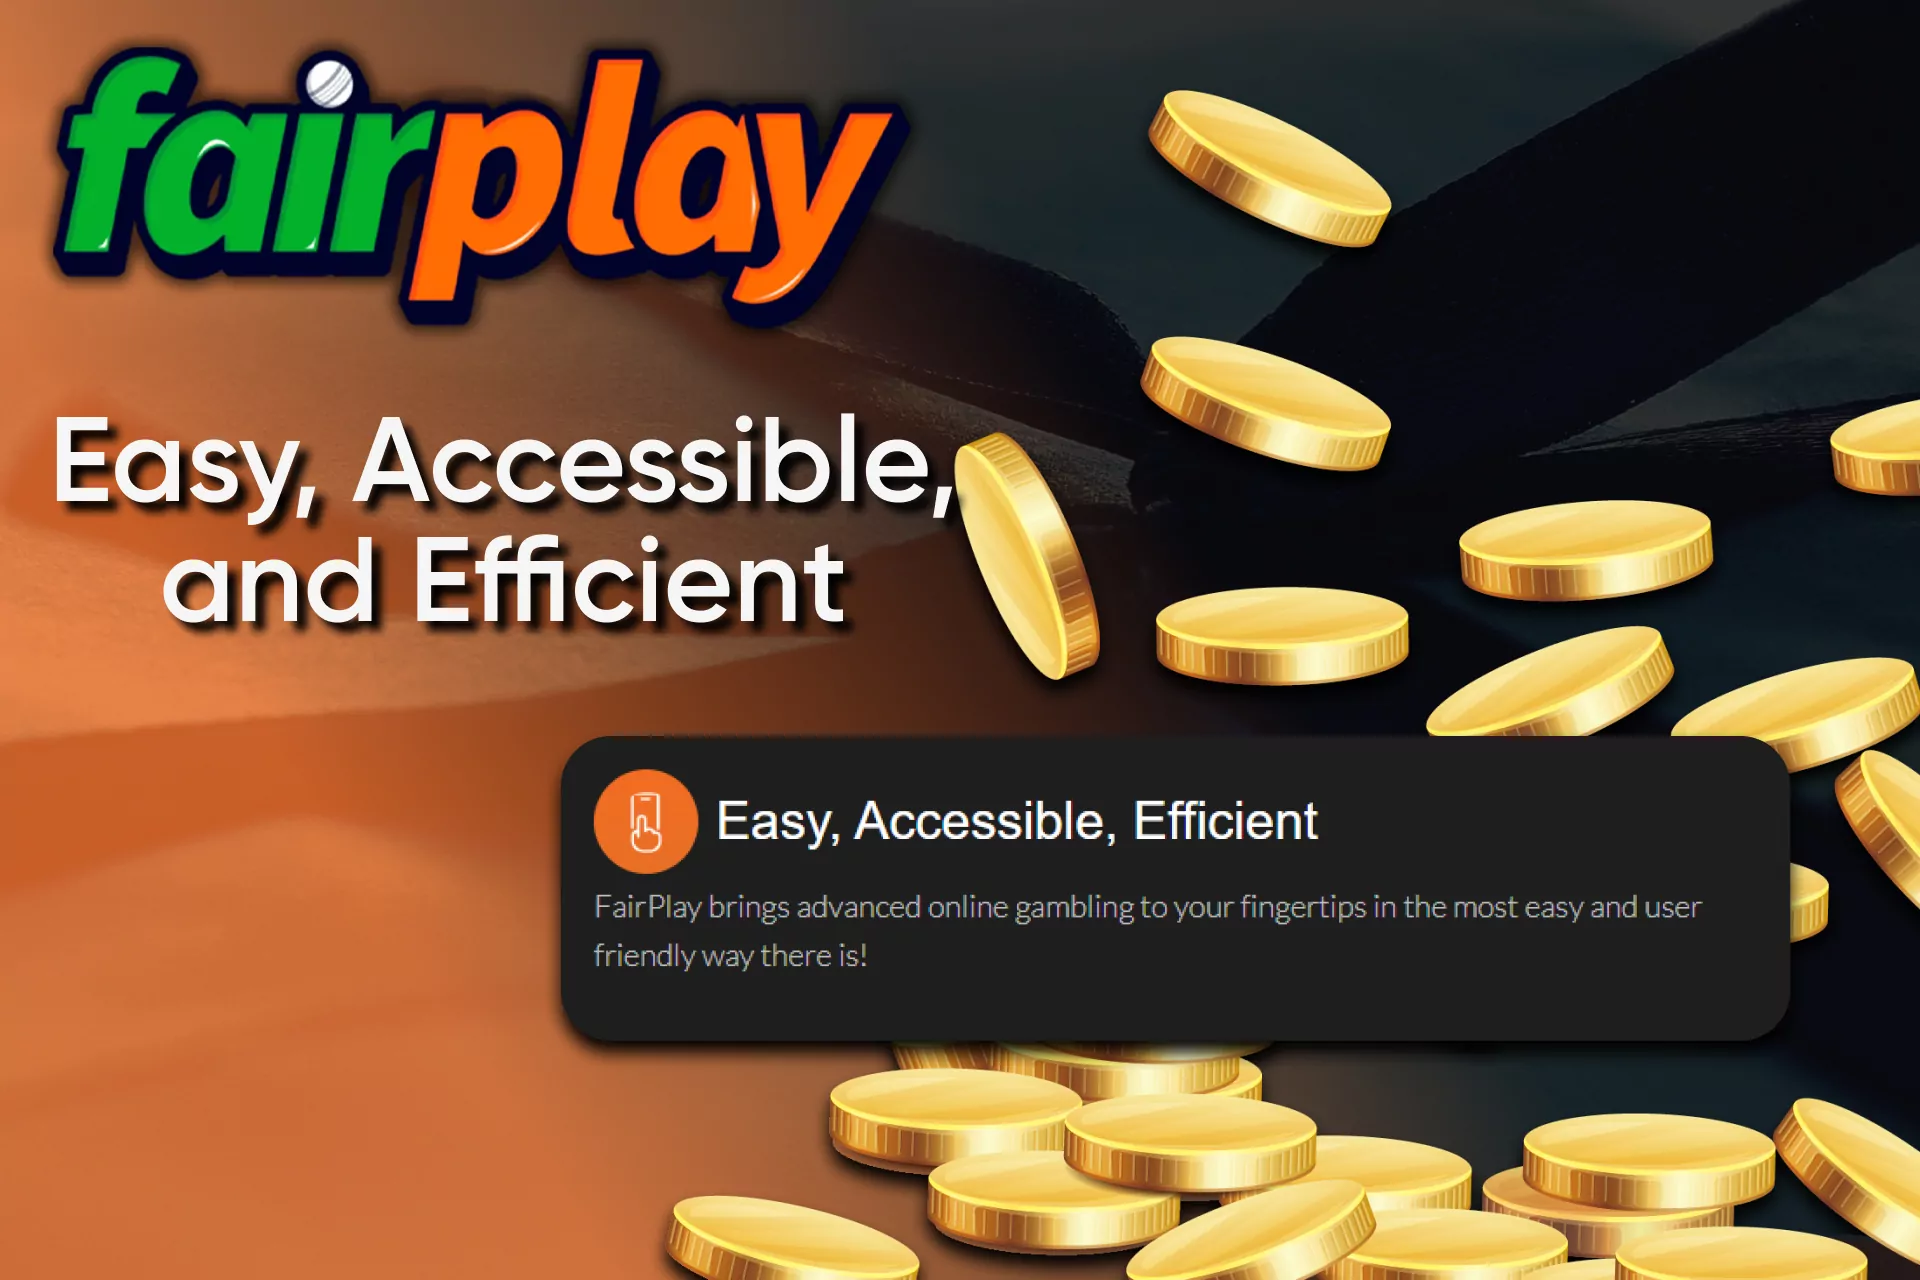 The Fairplay affiliate program has easy rules and efficient profits.